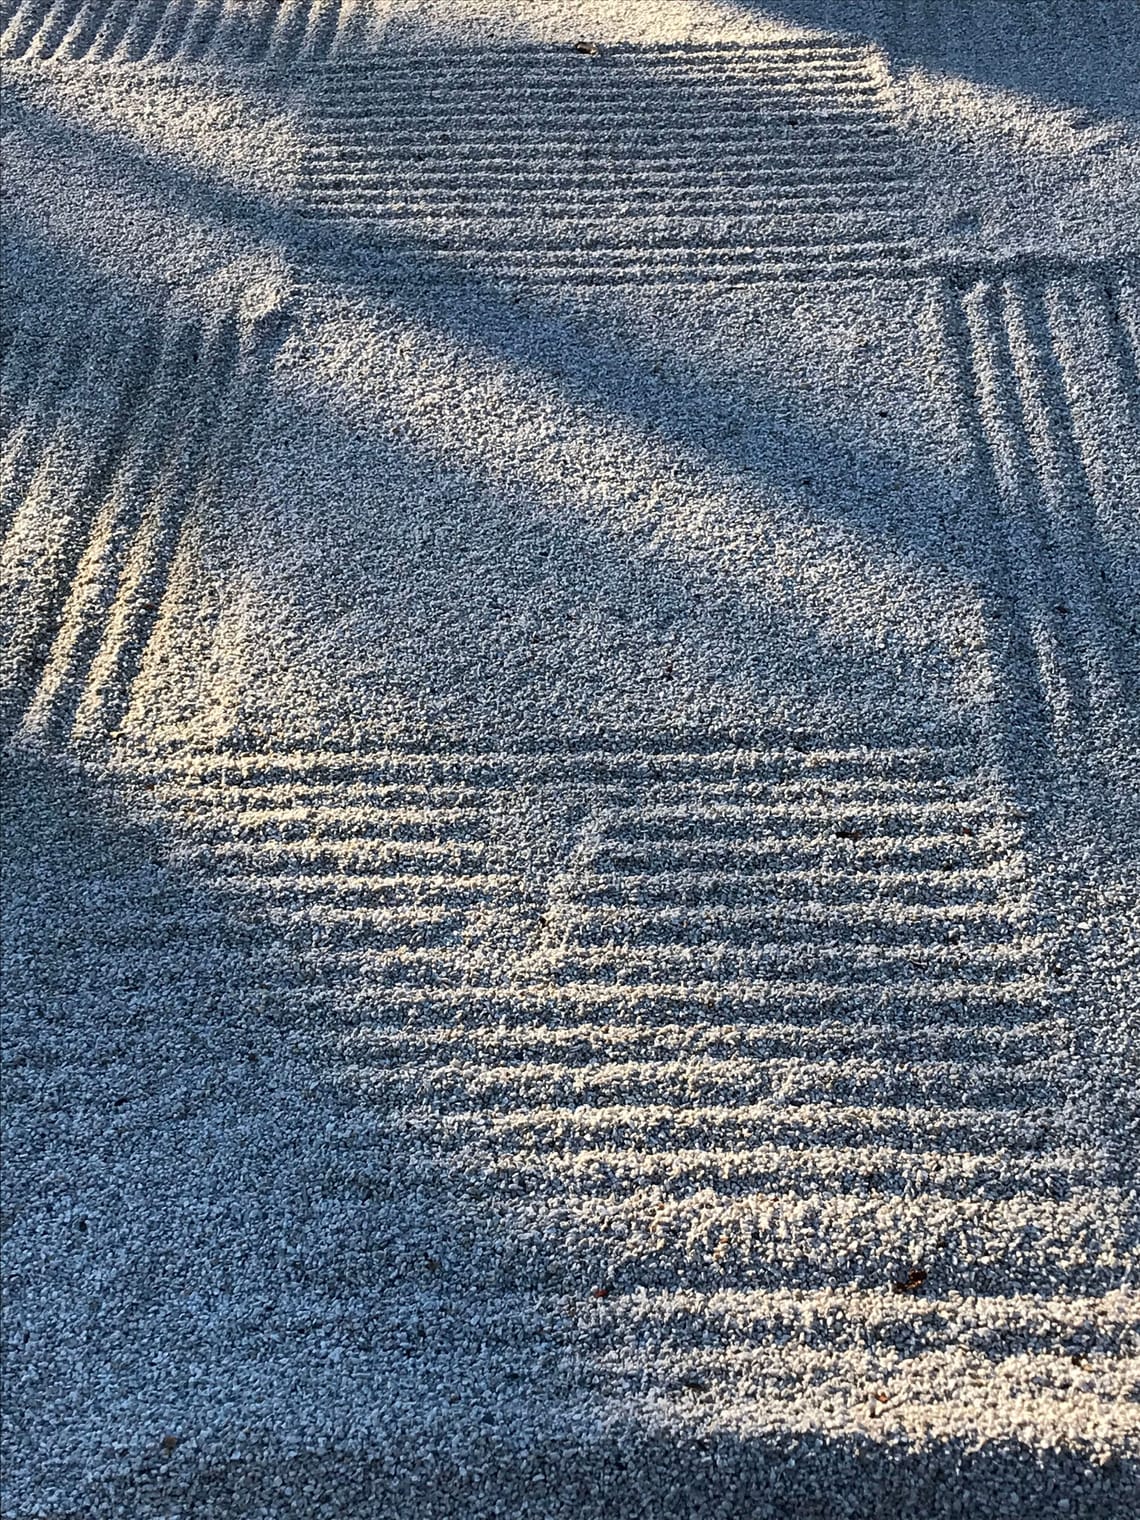 A Zen sand-garden—arranged in squares, some raked—transversed by light and shadows.